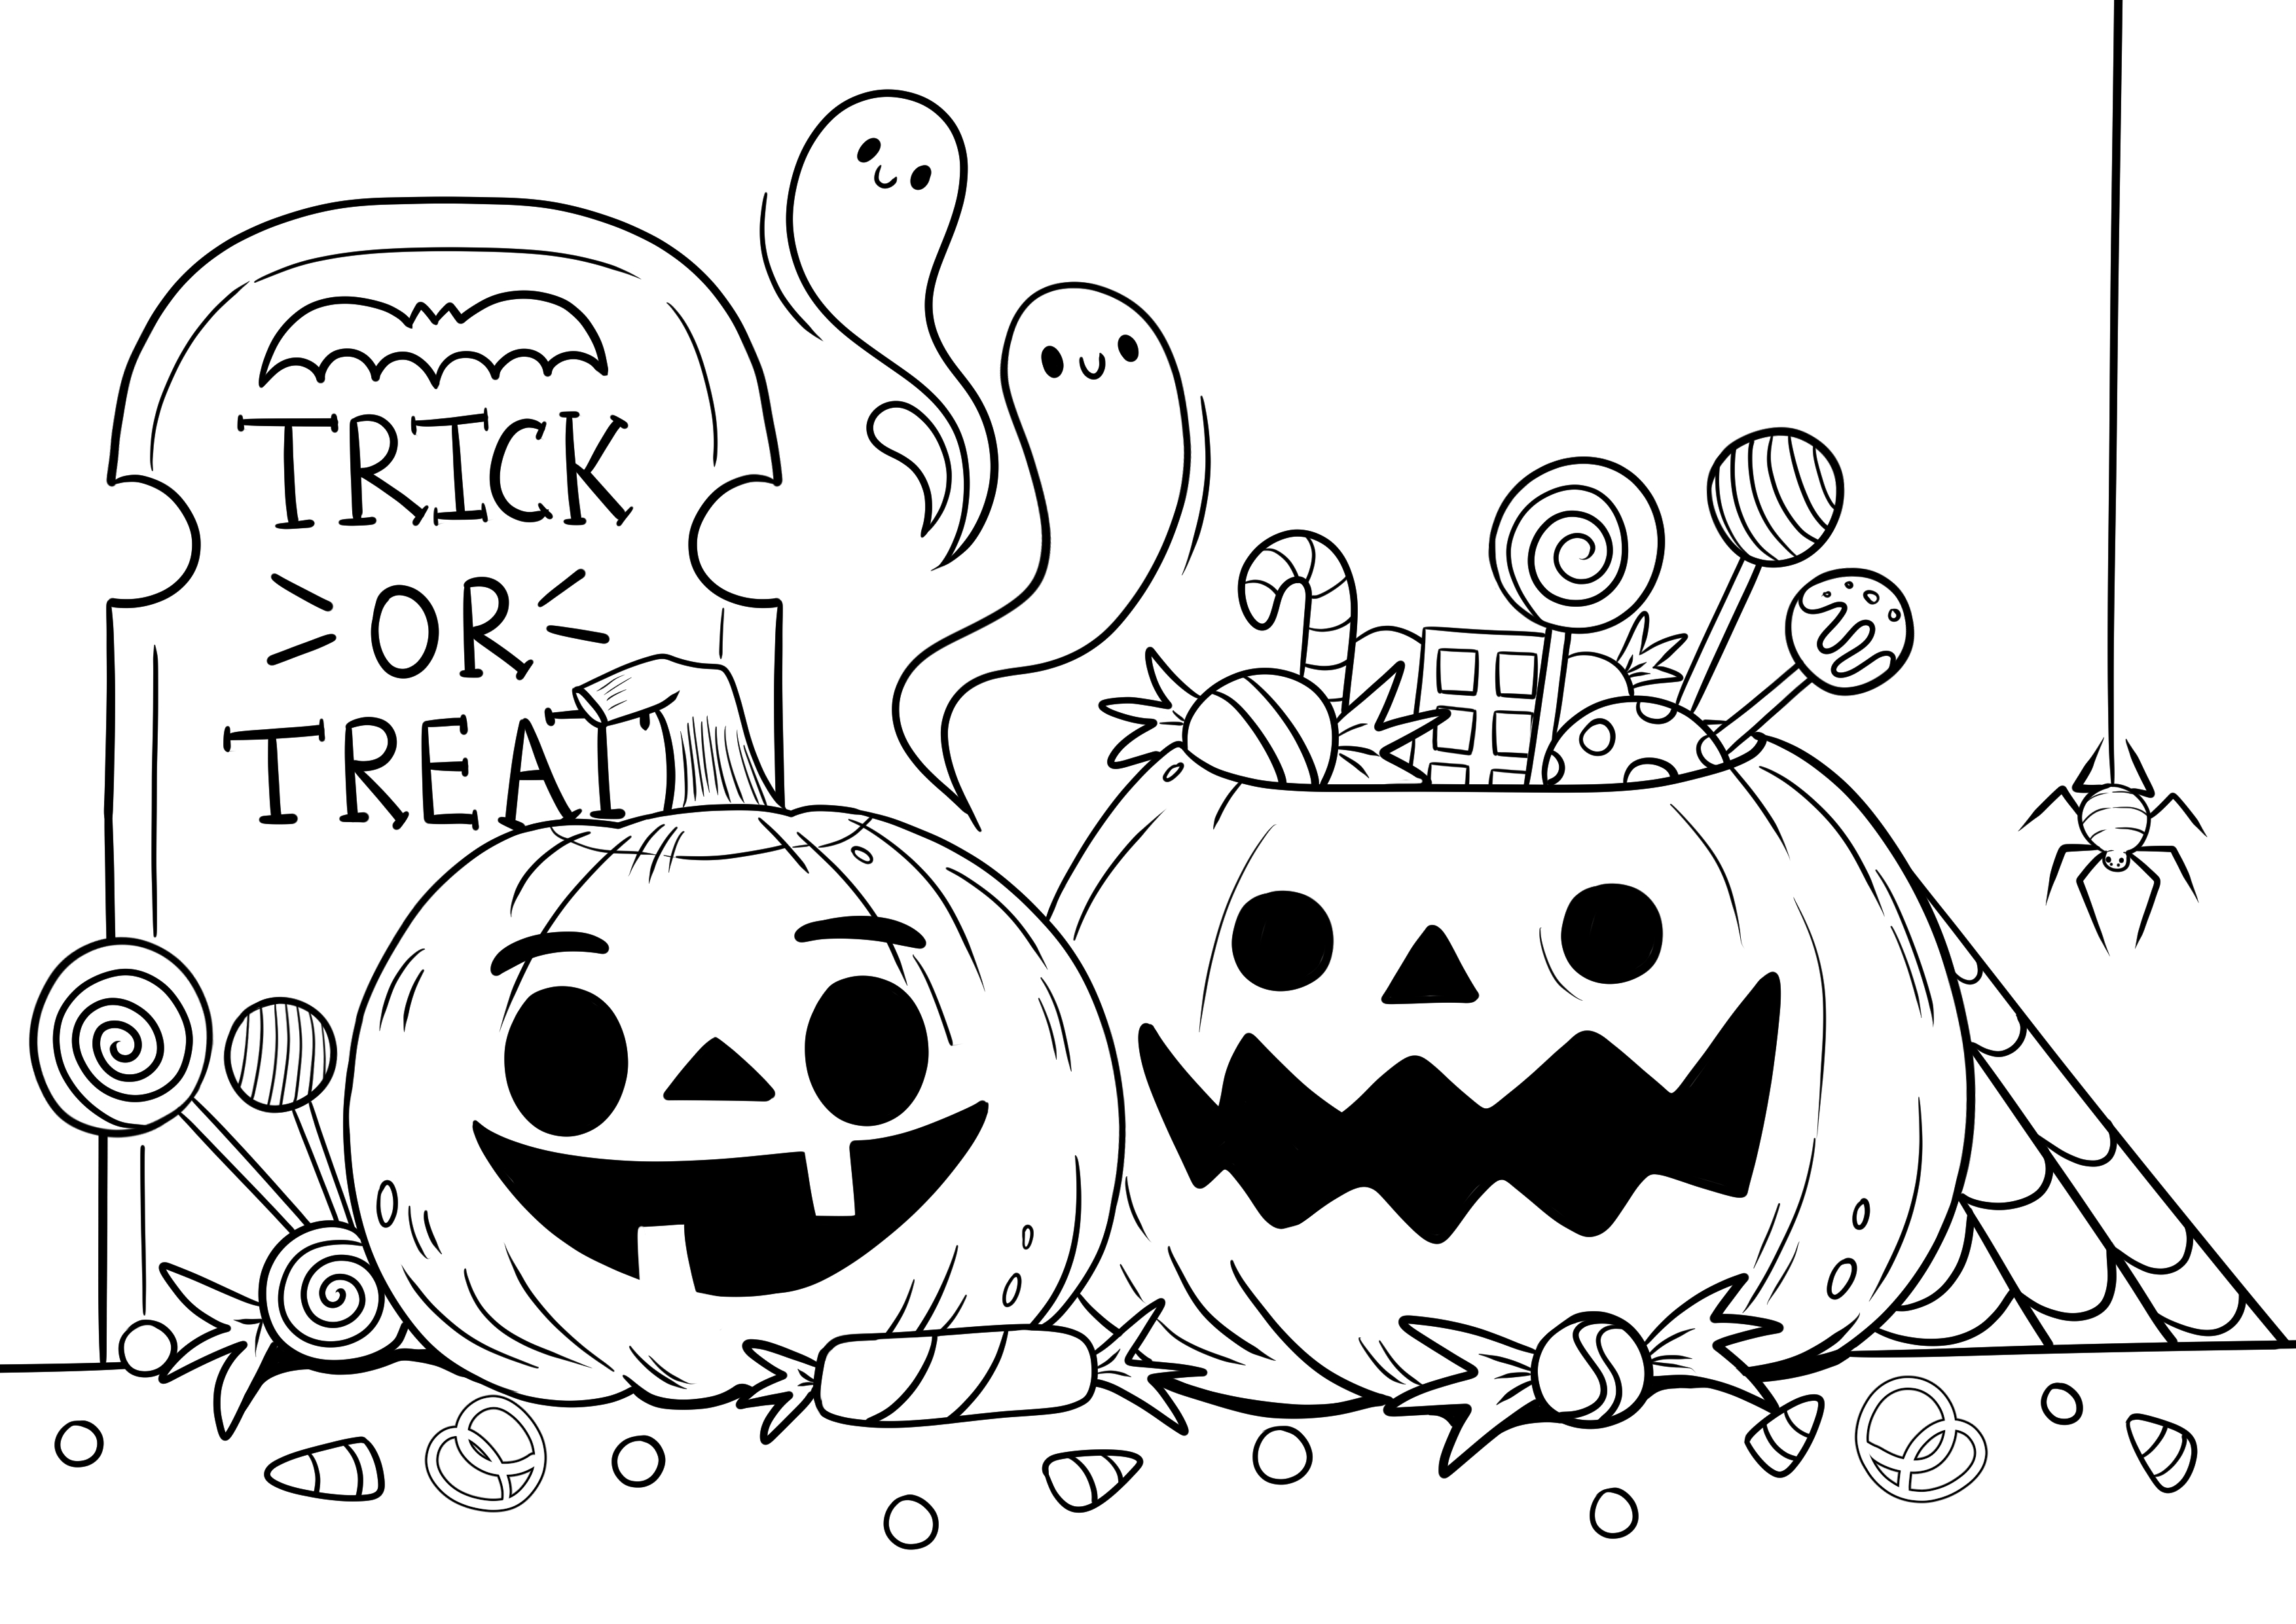 Halloween coloring page